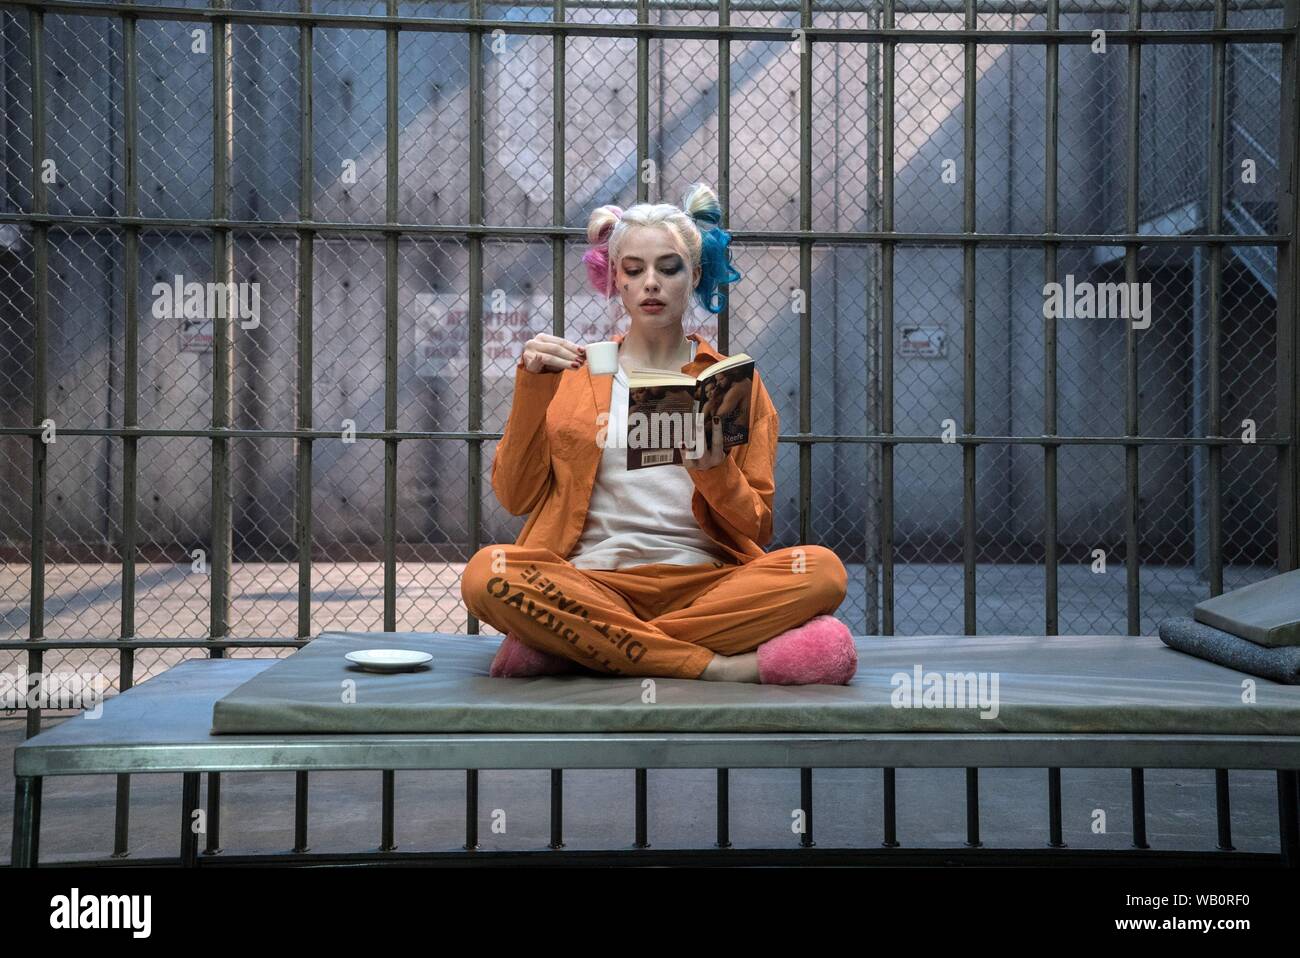 MARGOT ROBBIE in SUICIDE SQUAD (2016), directed by DAVID AYER. Credit: WARNER BROS PICTURES / Album Stock Photo